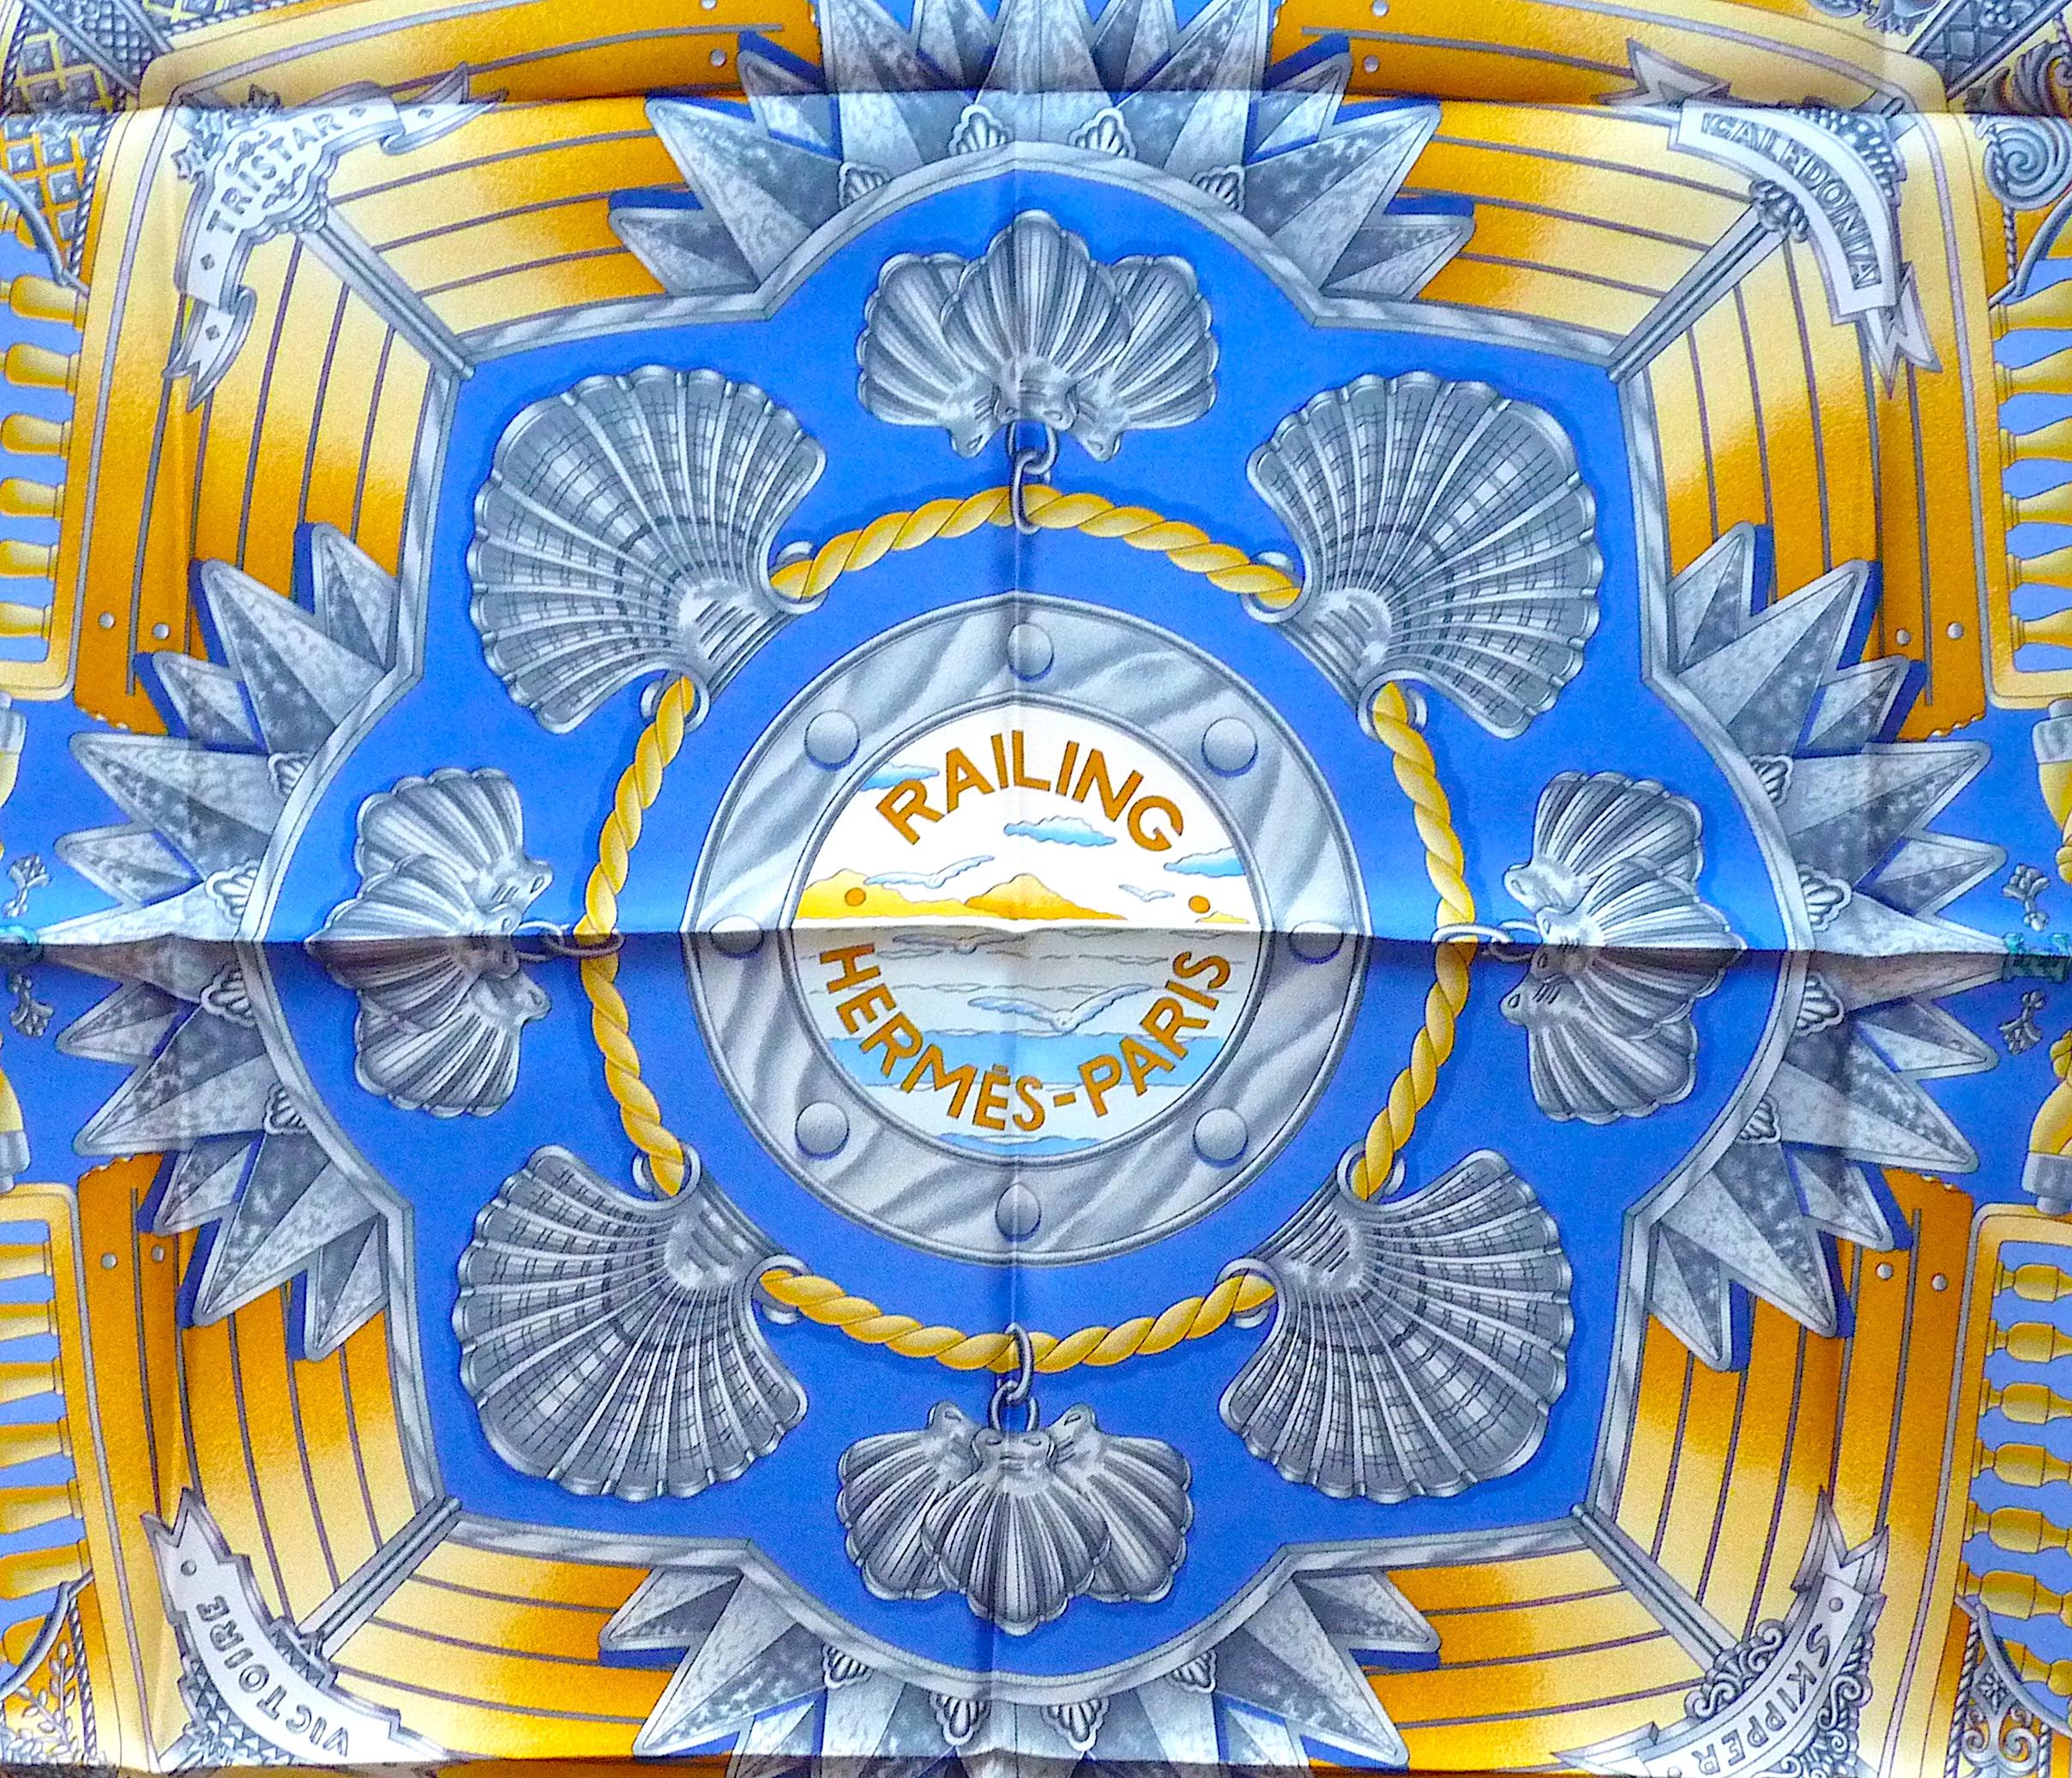 Gorgeous HERMES Silk Scarf, 90 cm x 90 cm , Entitled Railing, designed by Joachim Metz in 1998, Very sought after ! Absolutely Authentic and Unworn !

Care Tag attached, no box

Colors : Deep Blue, Sky Blue, Gold Pattern

Condition : Perfect